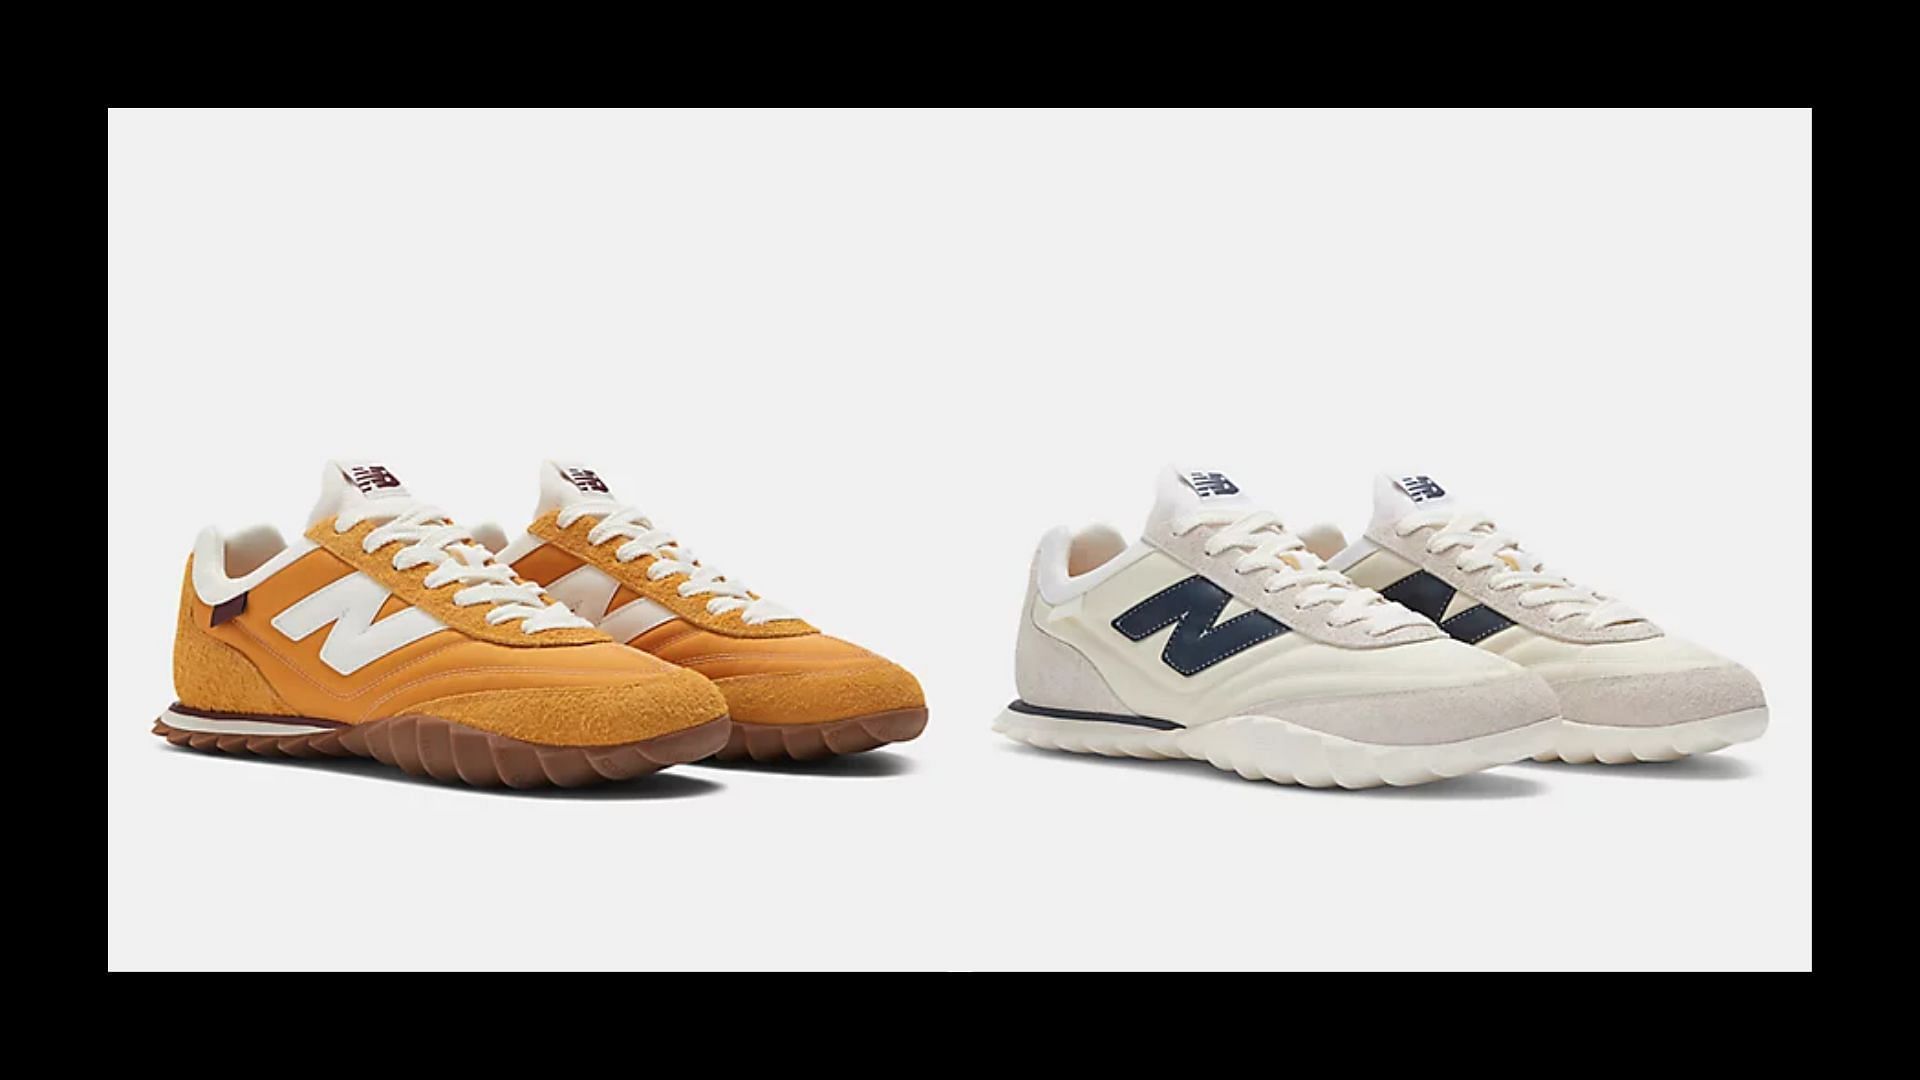 Newly launched Donald Glover x New Balance NB RC30 sneakers (Image via New Balance)